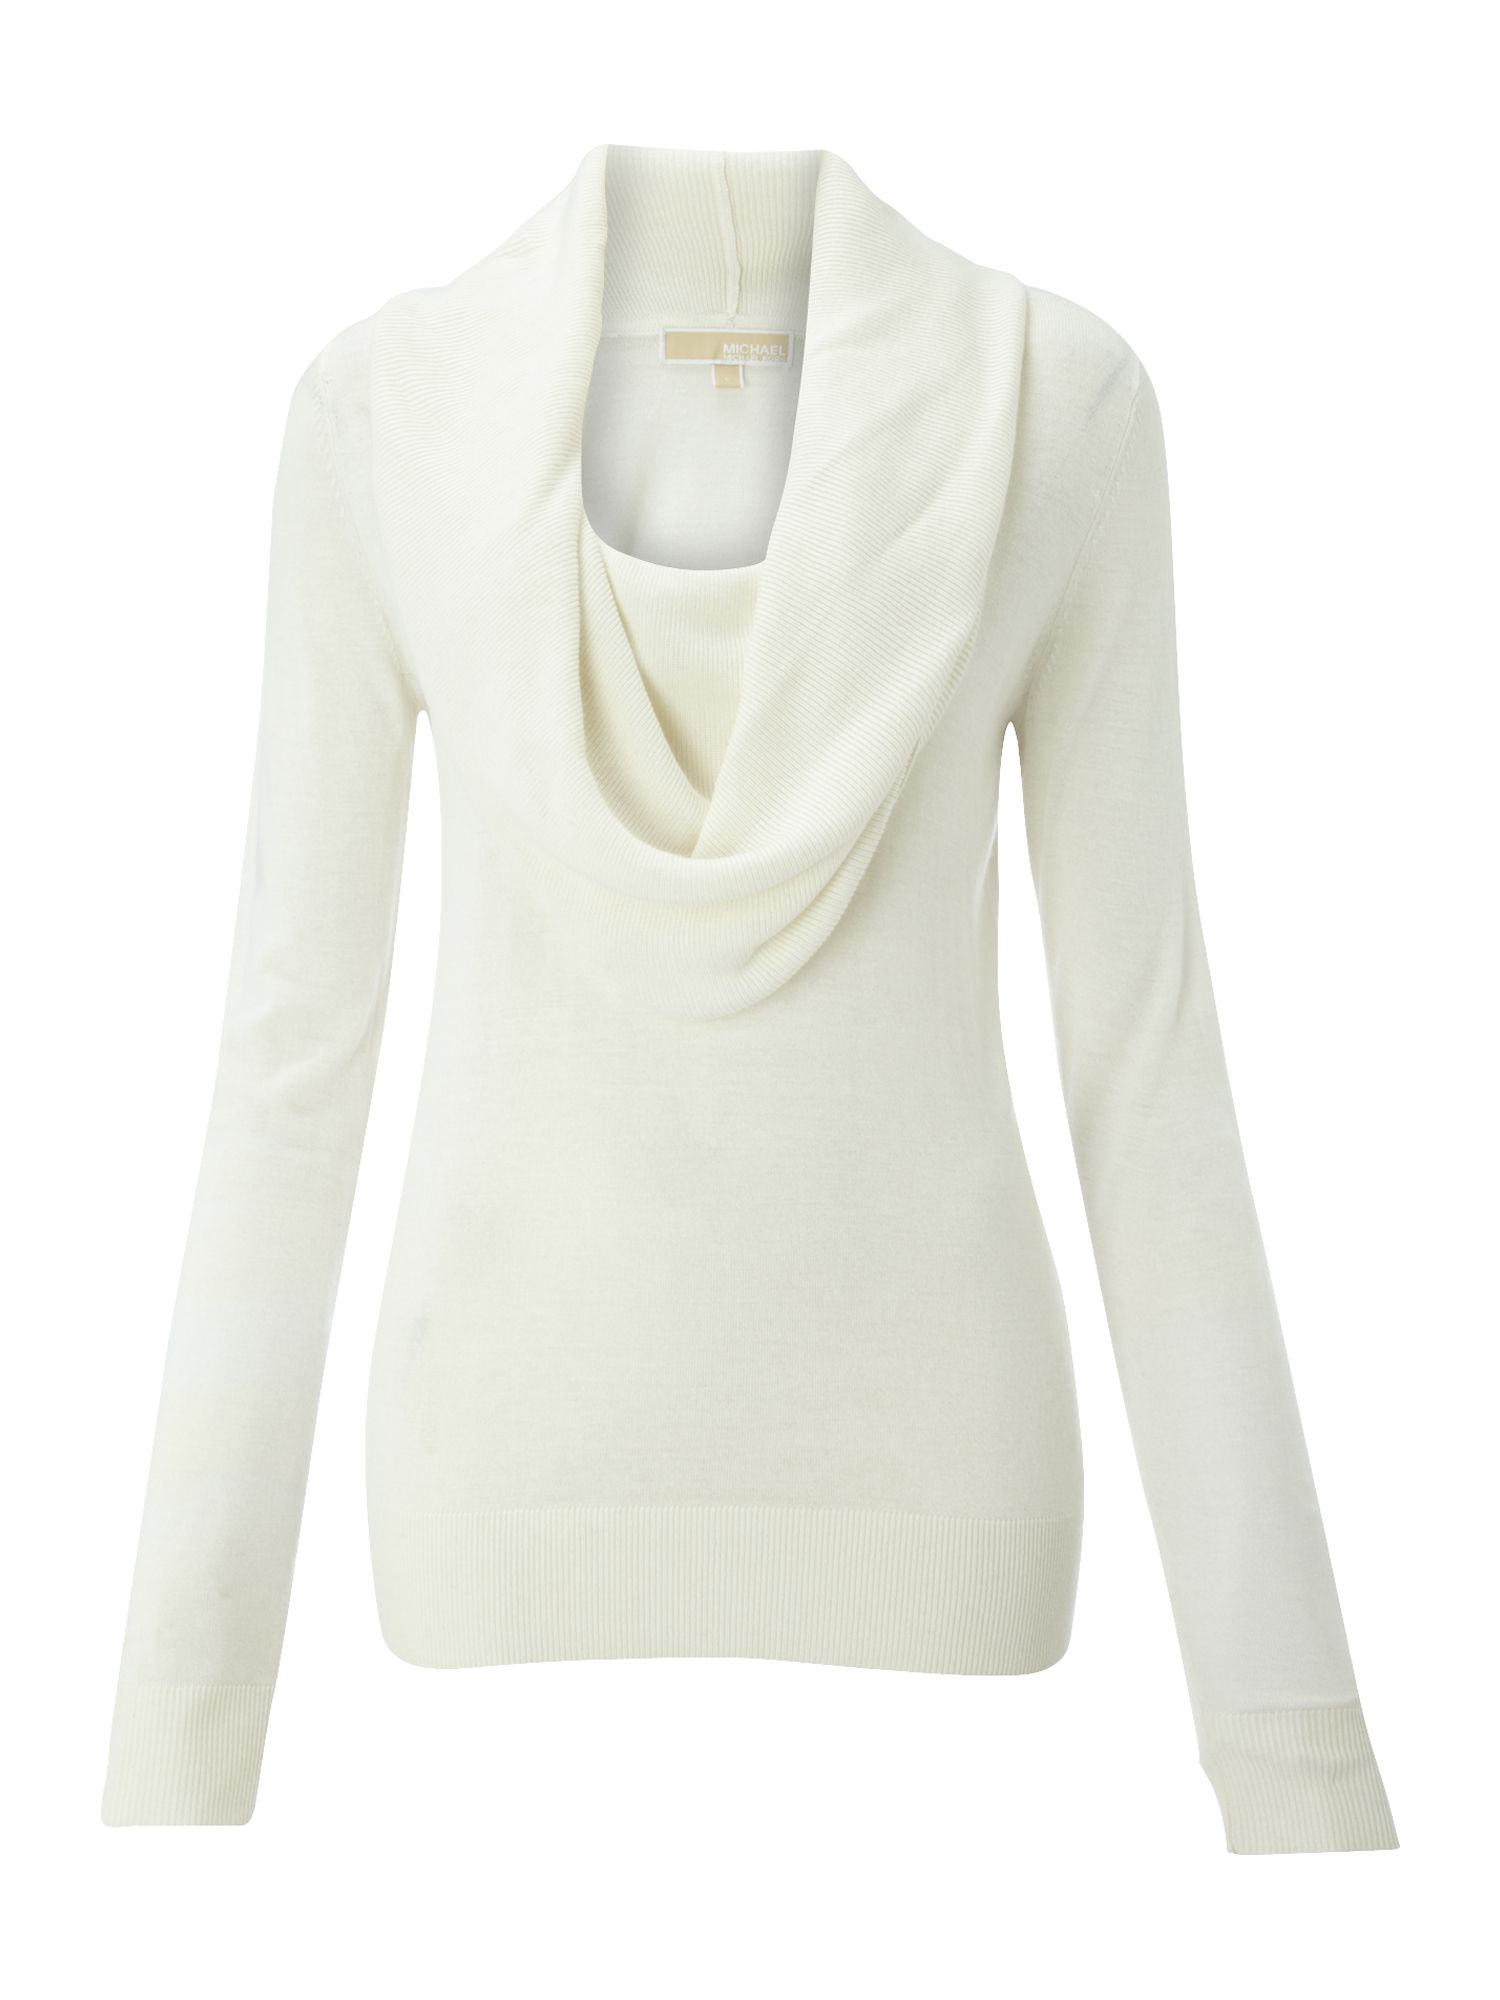 Michael michael kors Silk and Cashmere Cowl Neck Sweater in White | Lyst